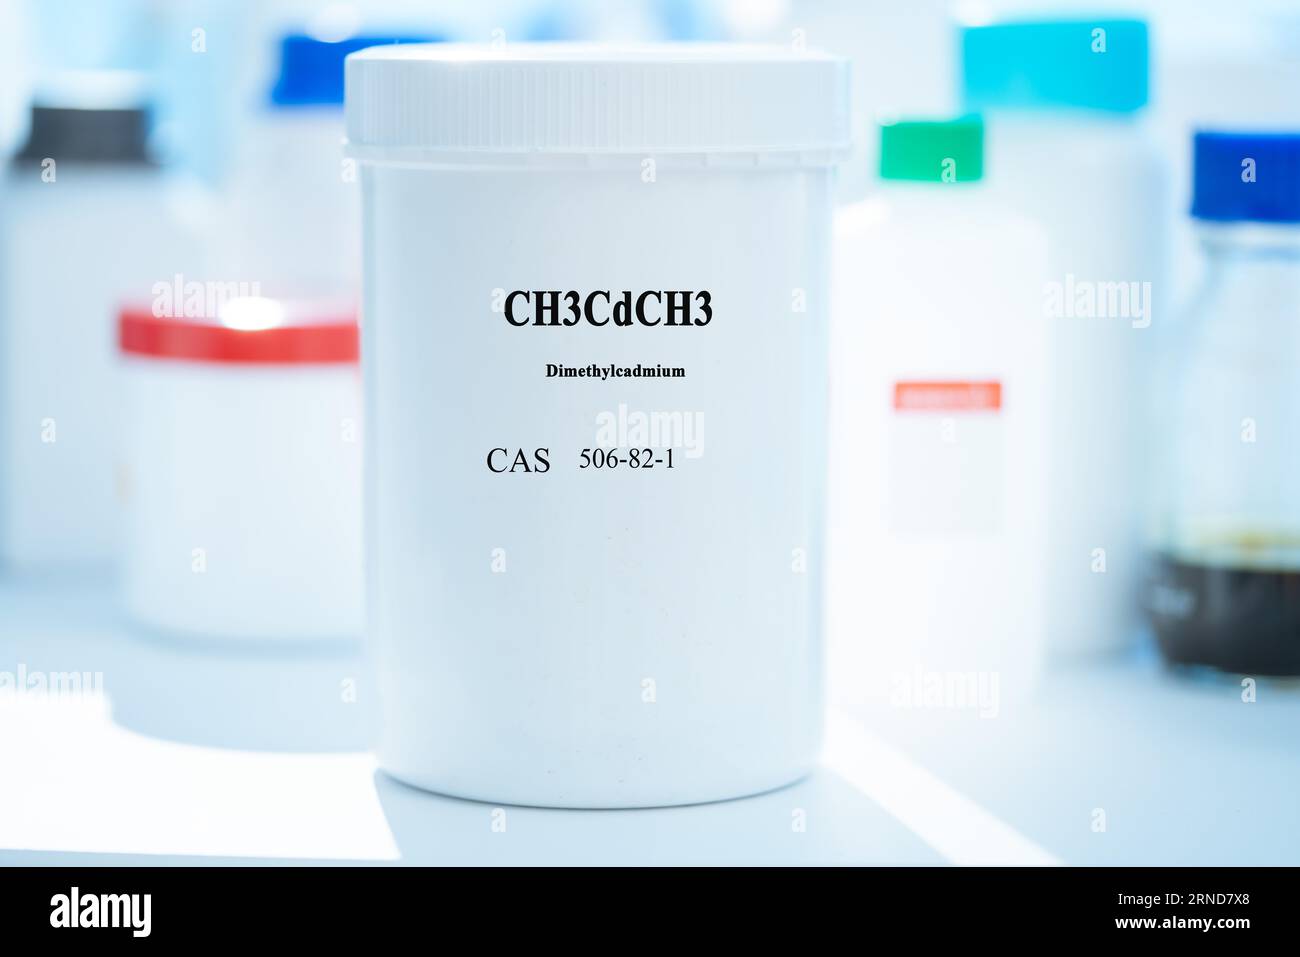 CH3CdCH3 dimethylcadmium CAS 506-82-1 chemical substance in white plastic laboratory packaging Stock Photo